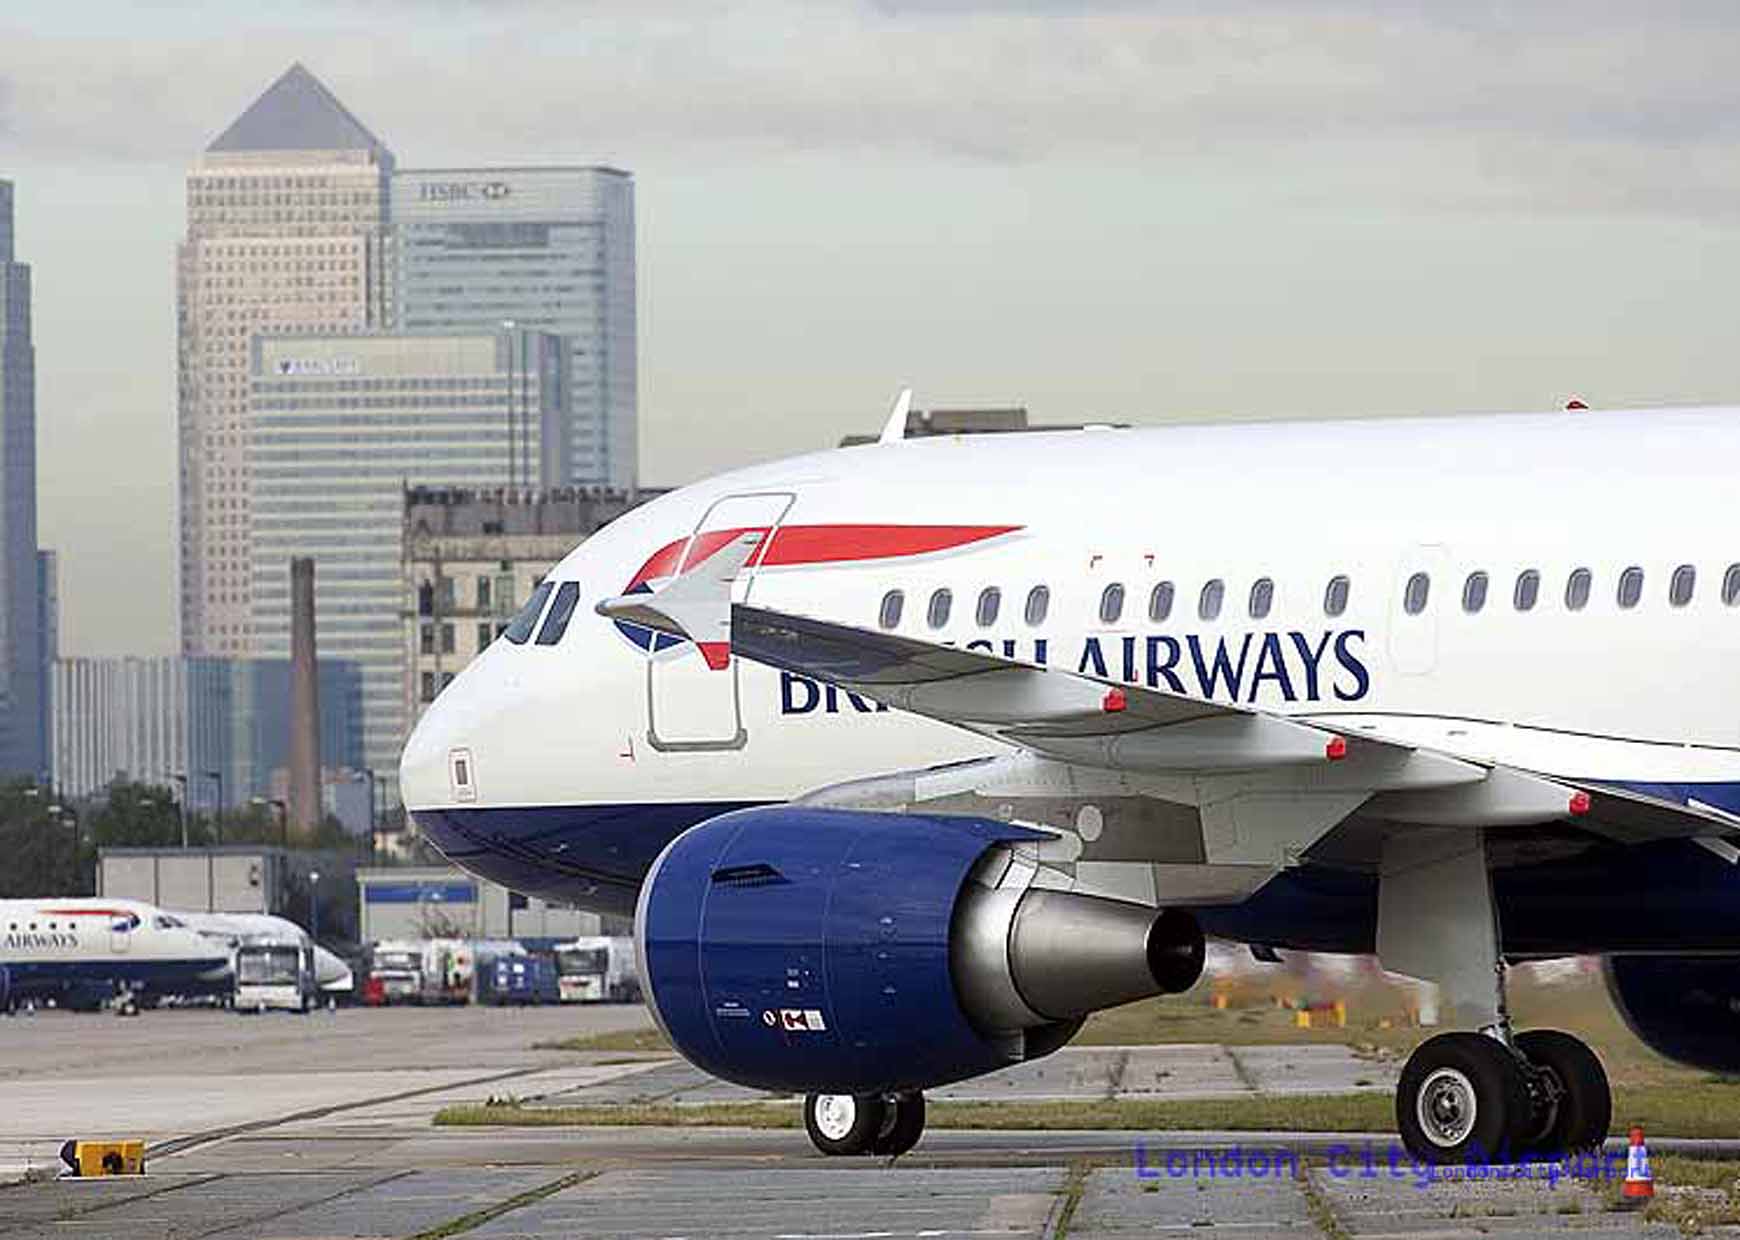 New British Airways daily service From London City Airport to New York JFK , starting today 29th Sept'09.